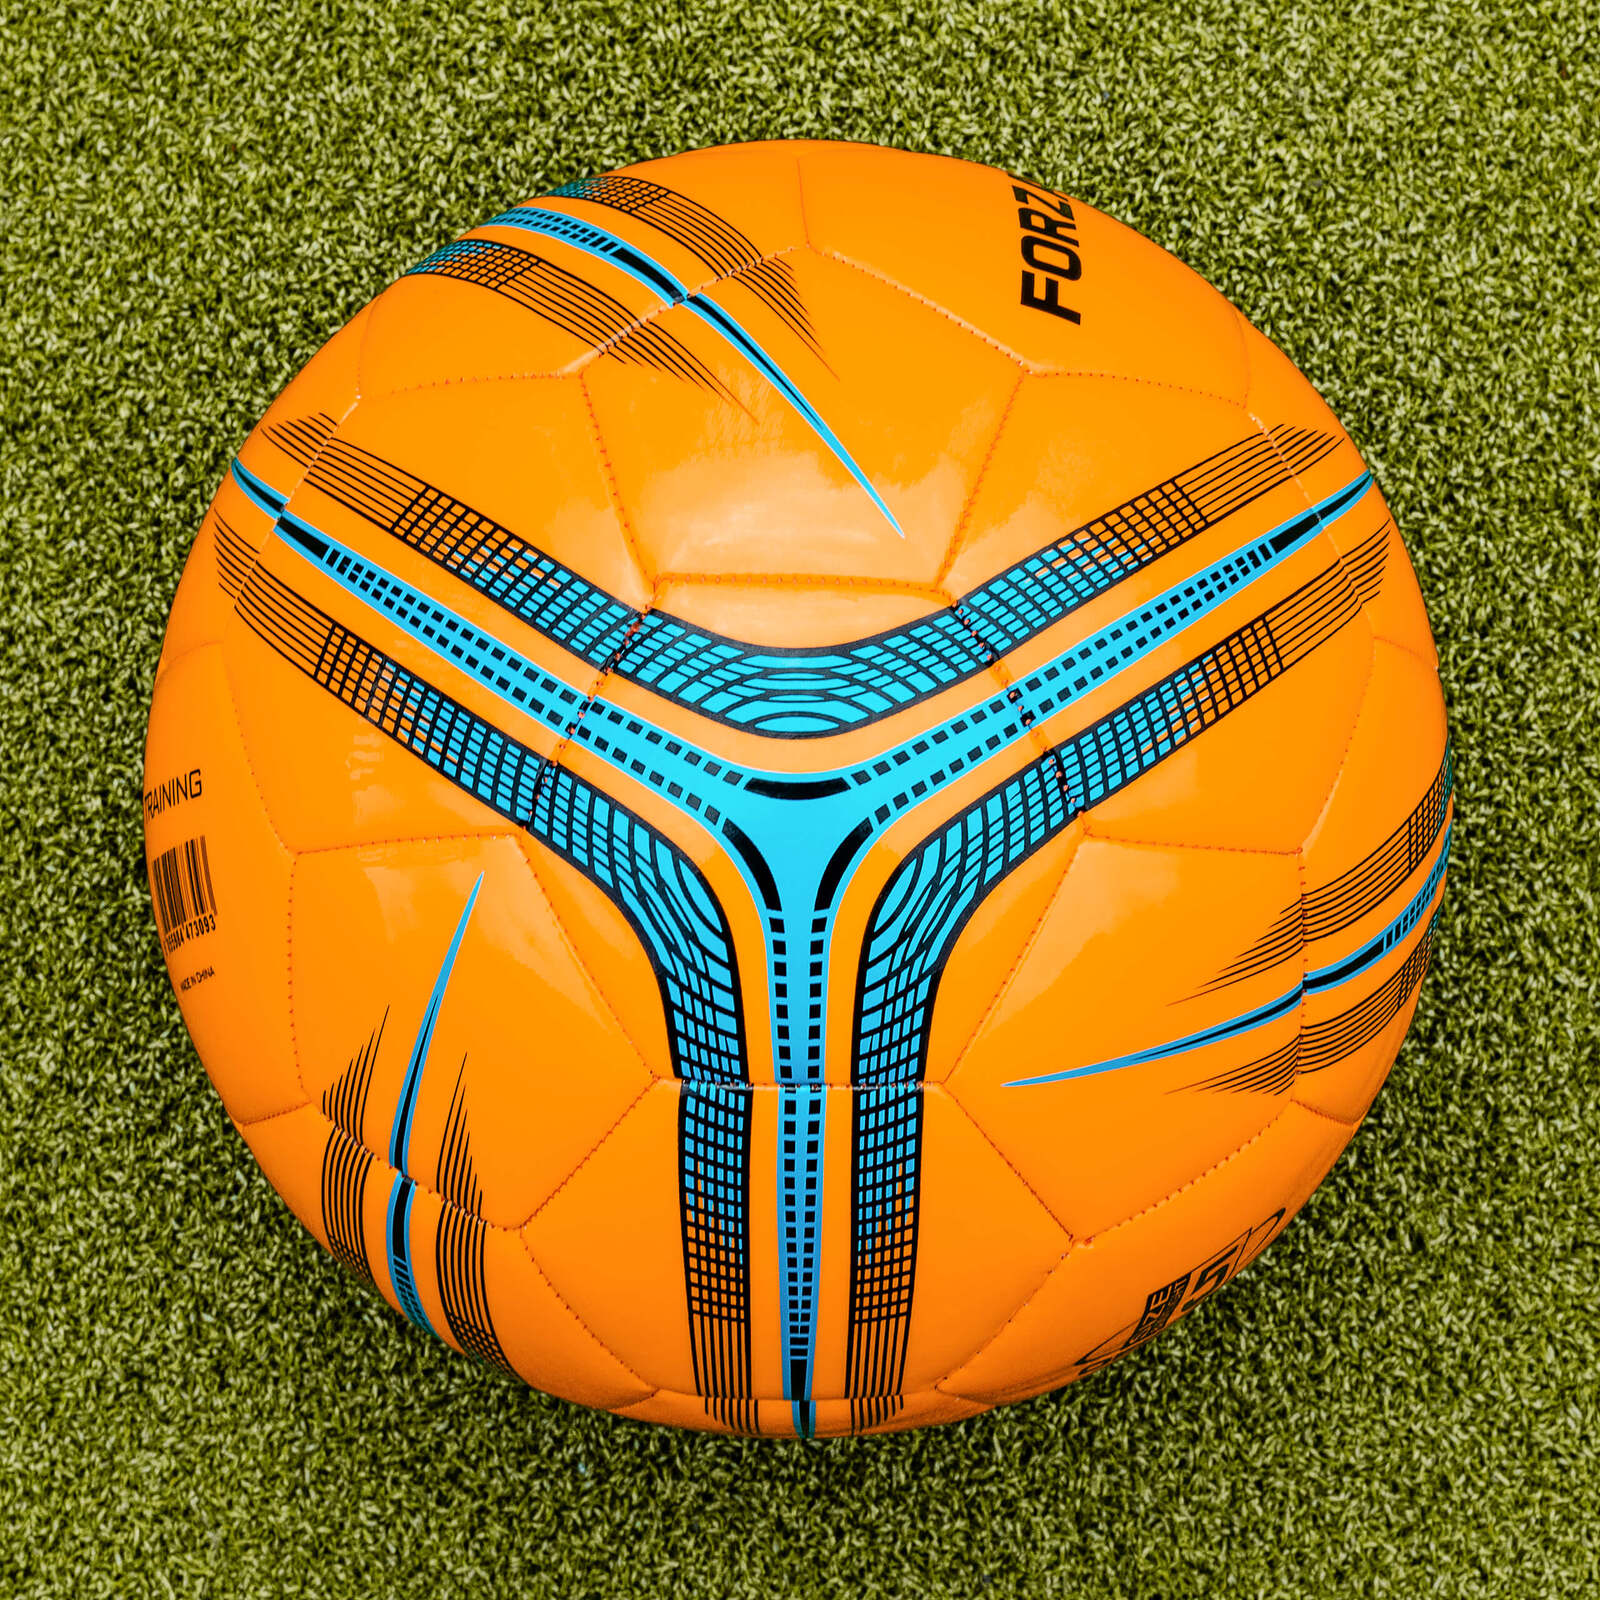 FORZA TRAINING SOCCER BALL [Ball Size:: Size 1 (Mini)] [Pack Size:: Pack of 1]